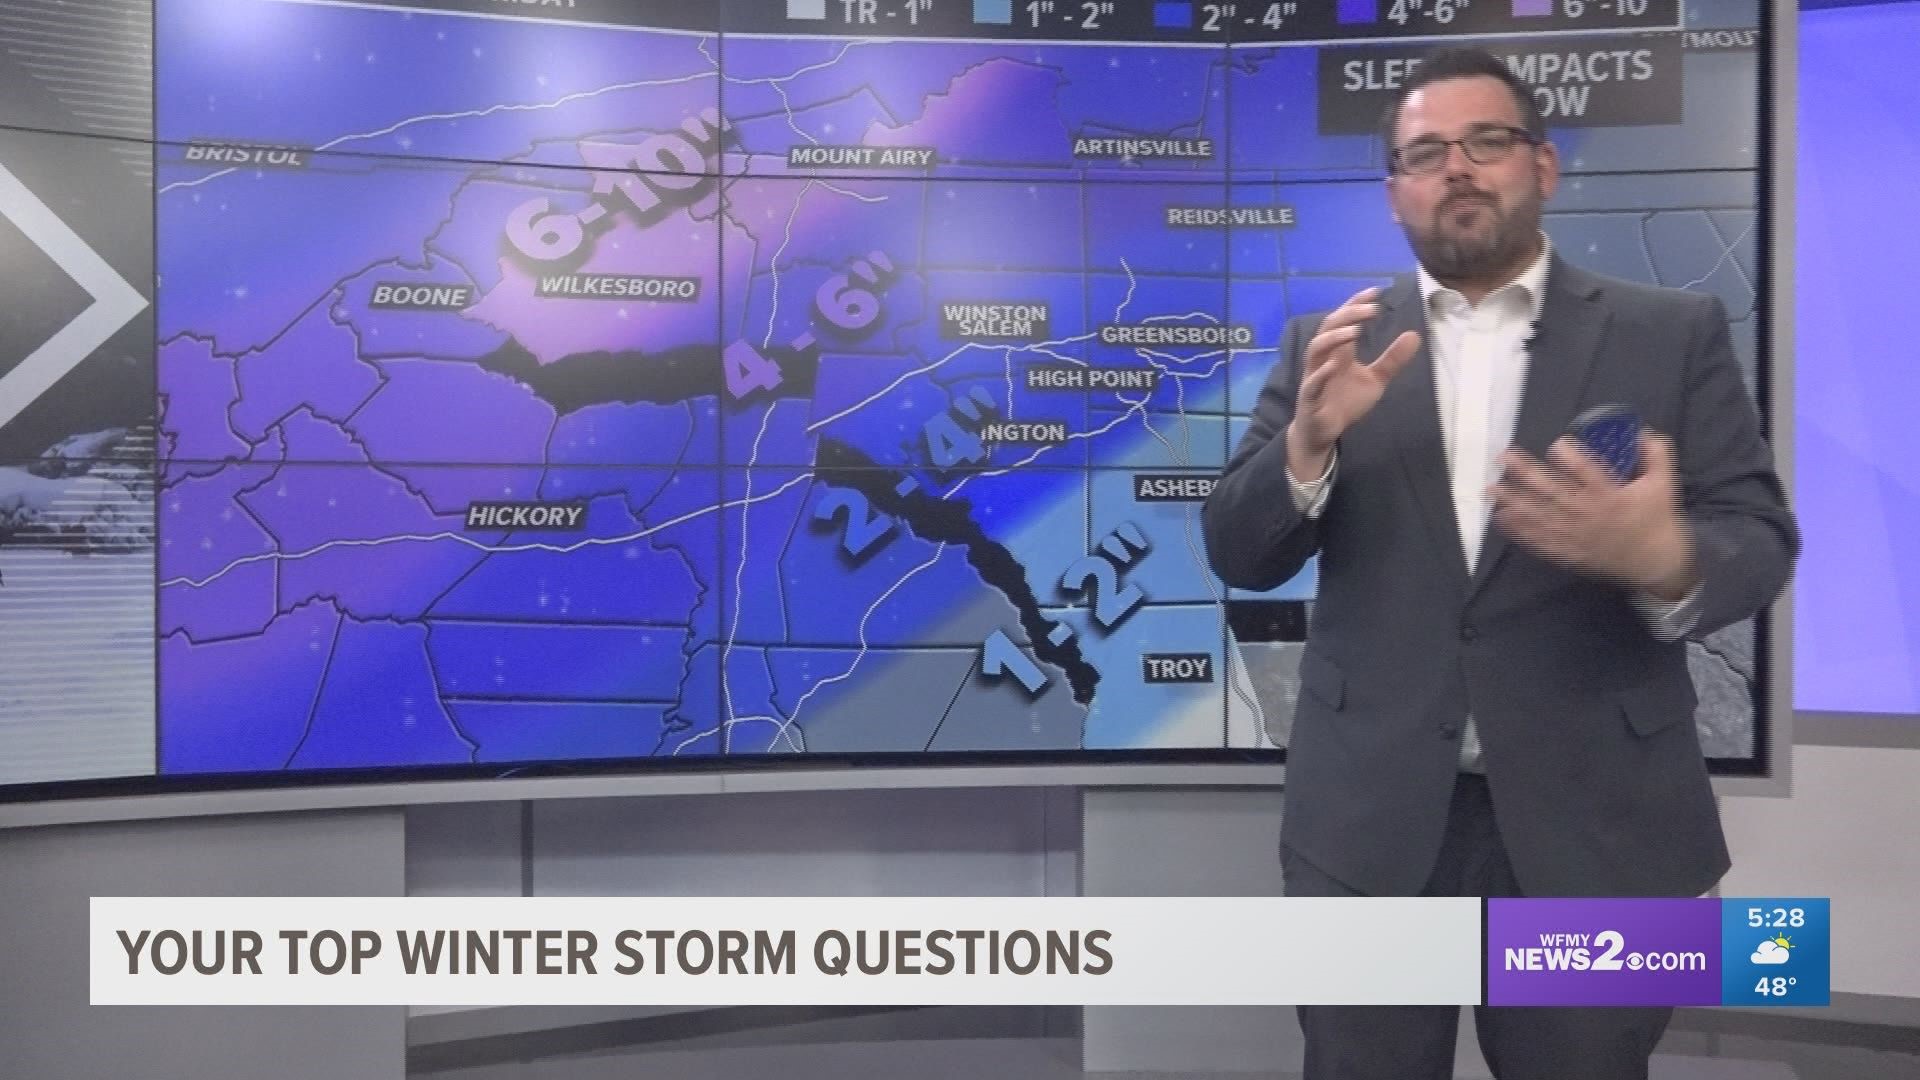 Chief Meteorologist Tim Buckley answers your top three winter weather questions.